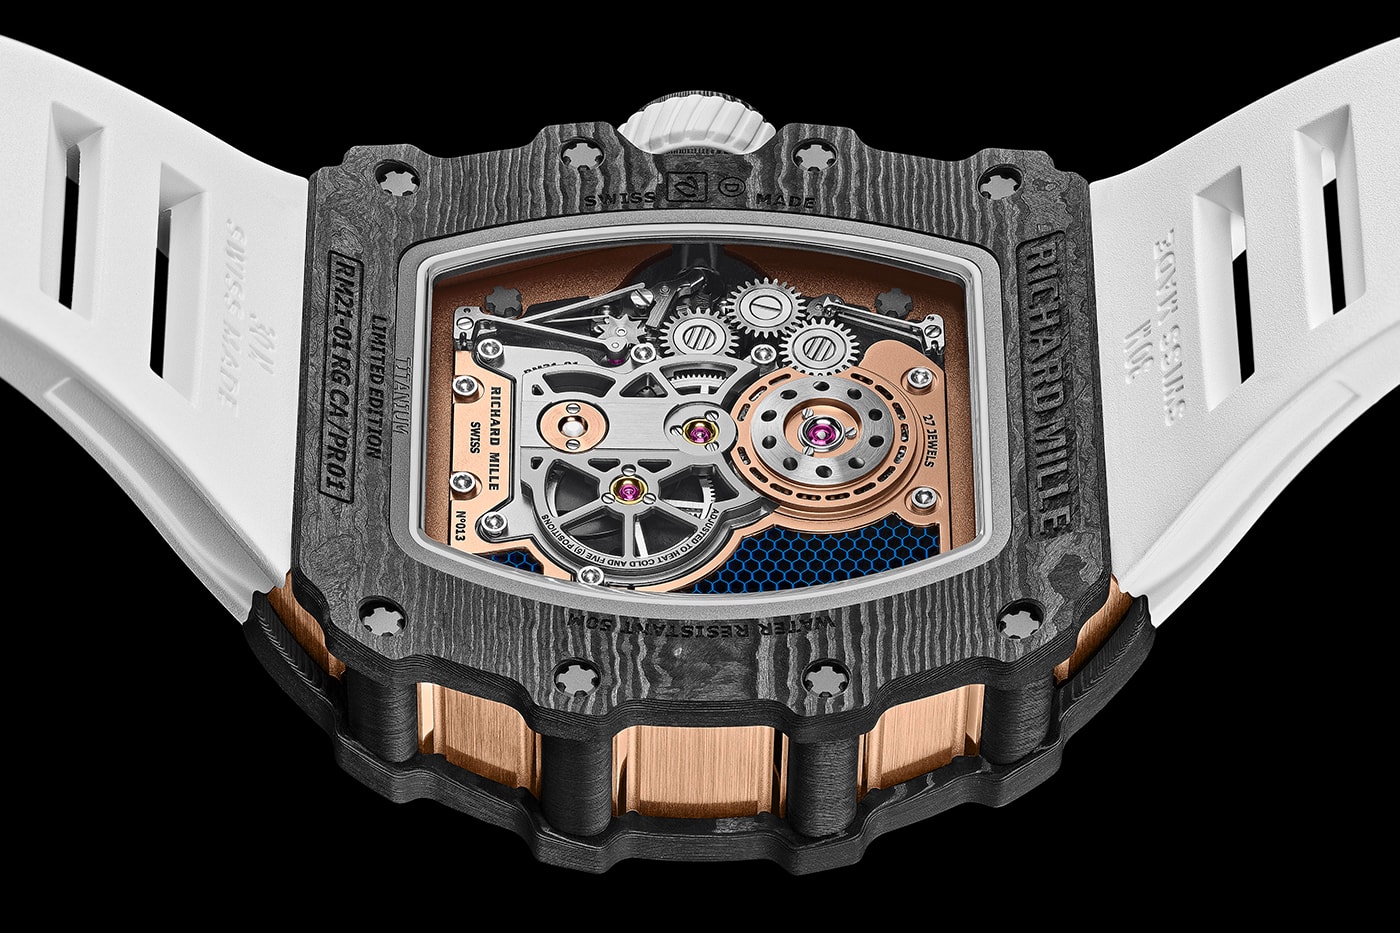 Richard Mille RM 21-01 TOURBILLON AERODYNE info HAYNES 214 Carbon TPE Red Gold Luxury watches swiss watches racing expensive 